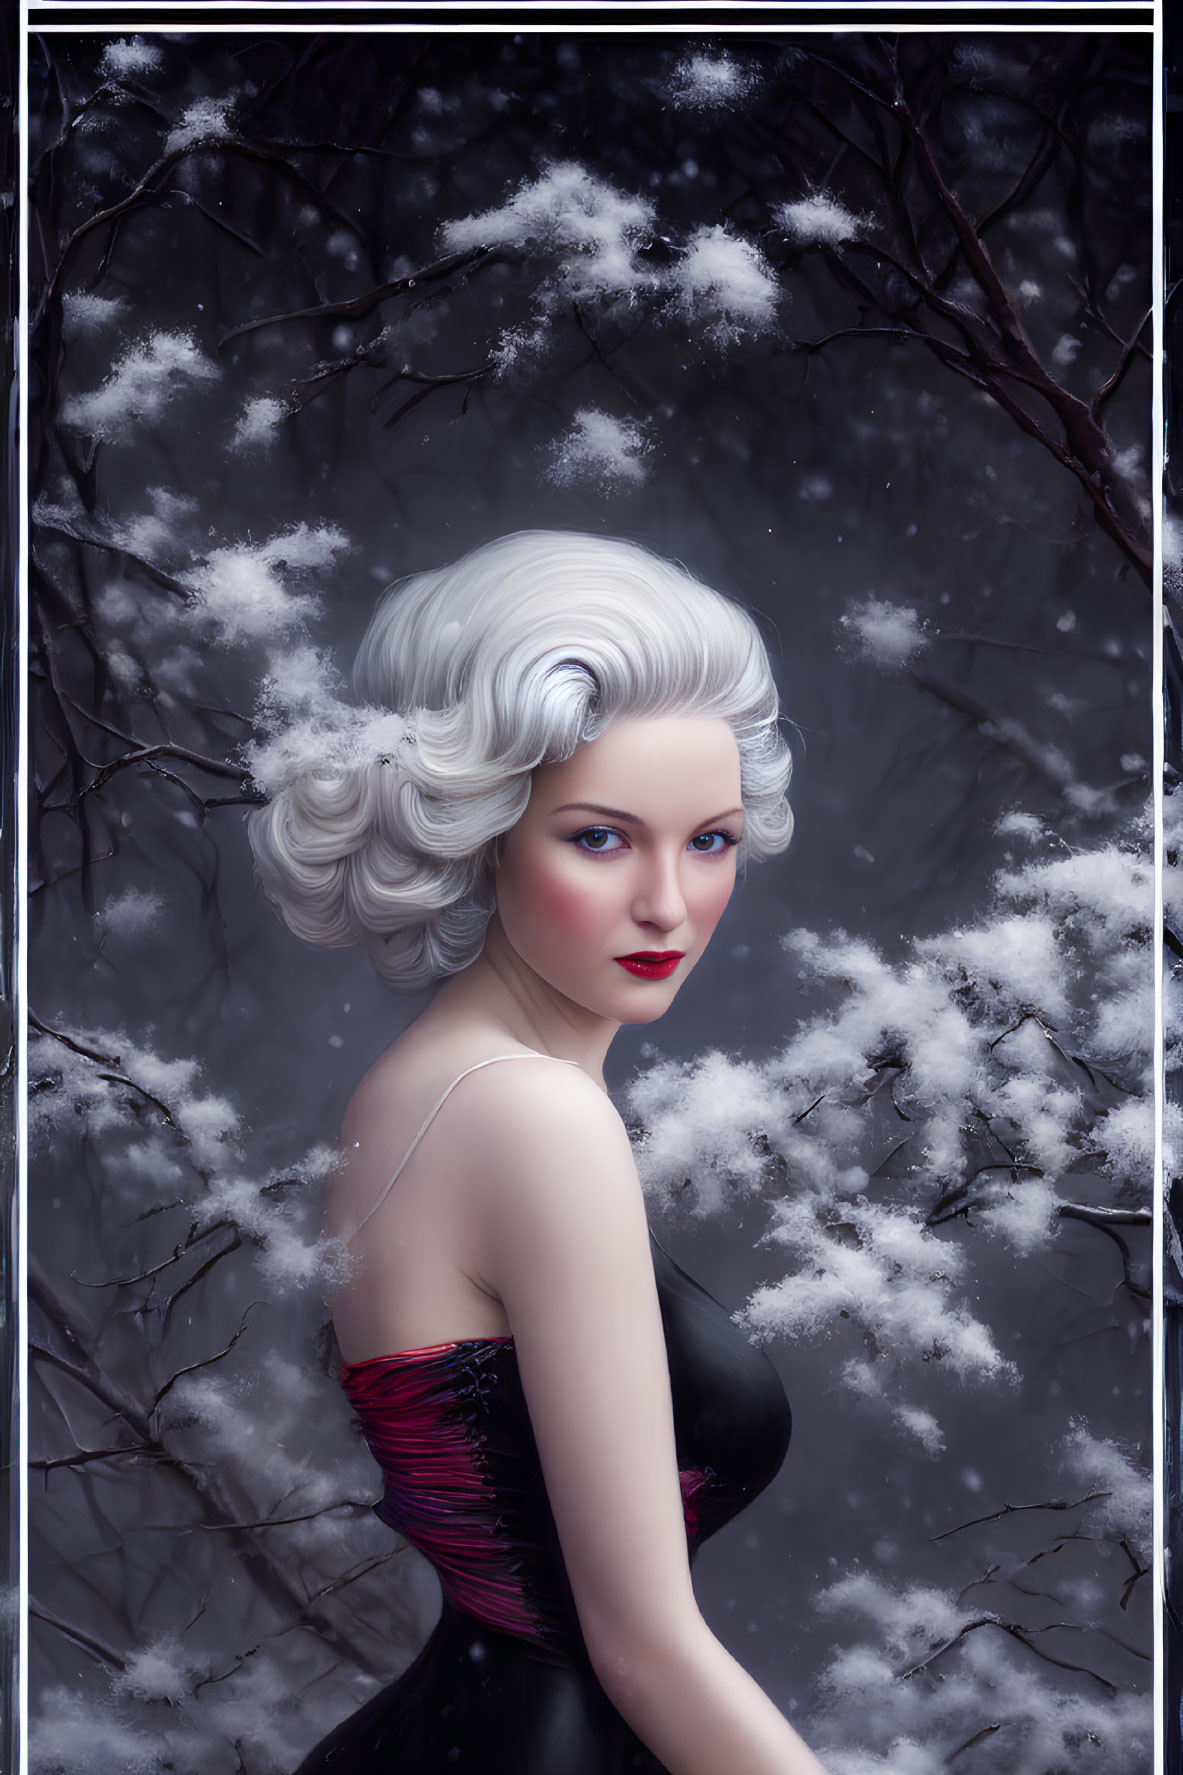 Stylized woman with white hair in red dress against snowy background